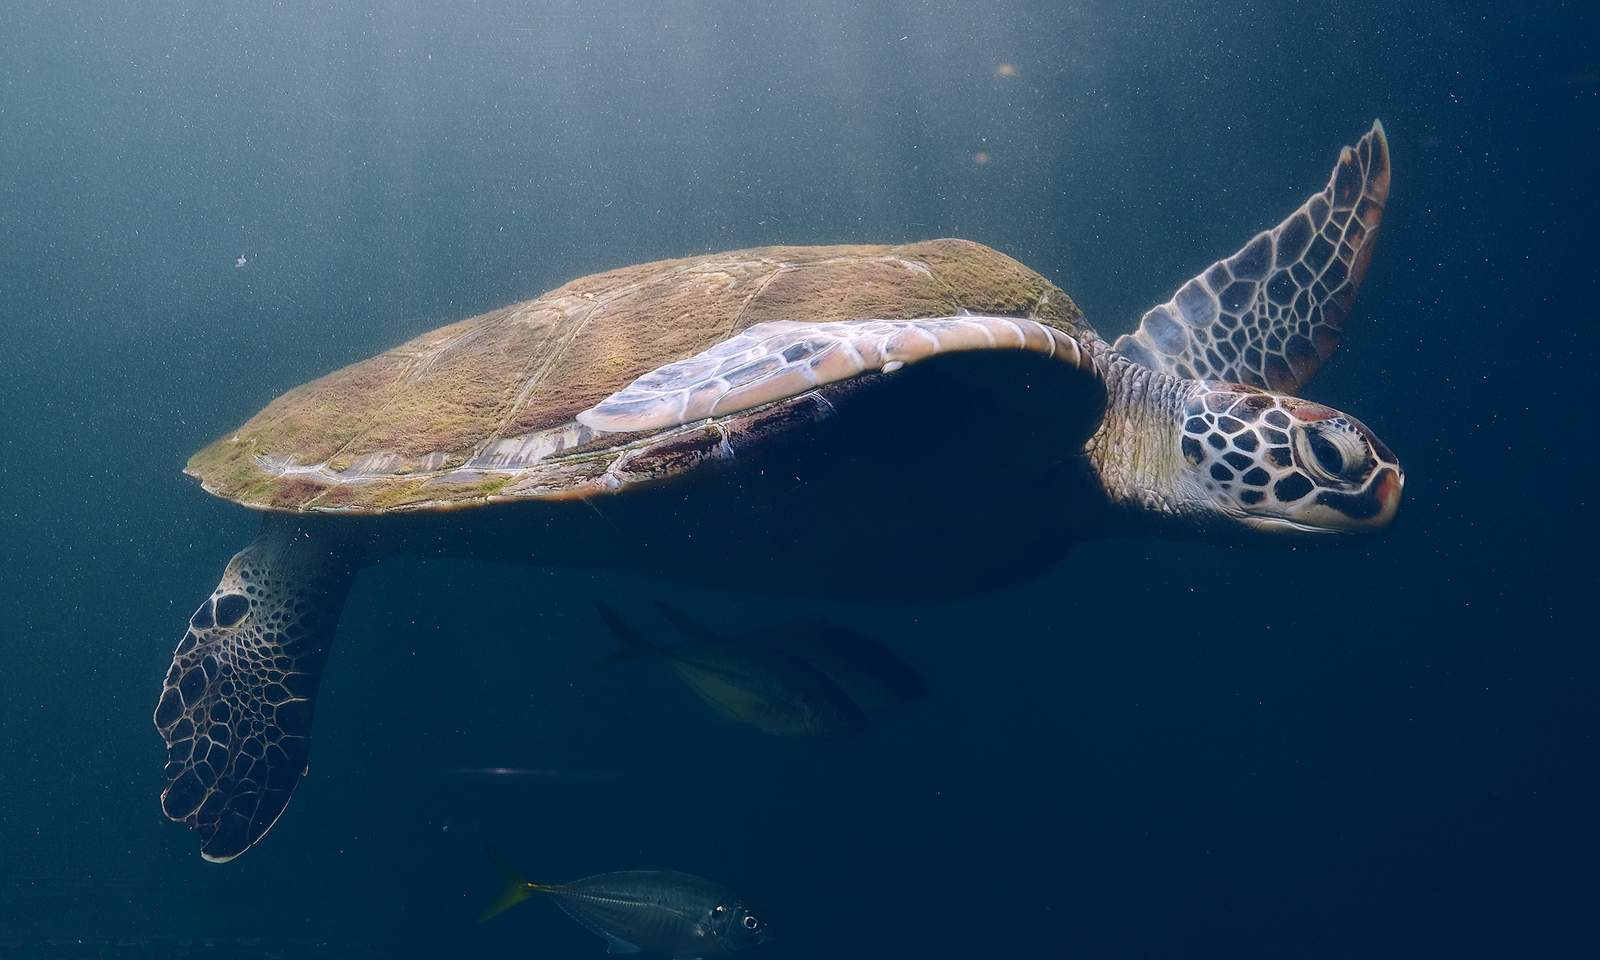 Feds seek end to dredging limits that protect sea turtles